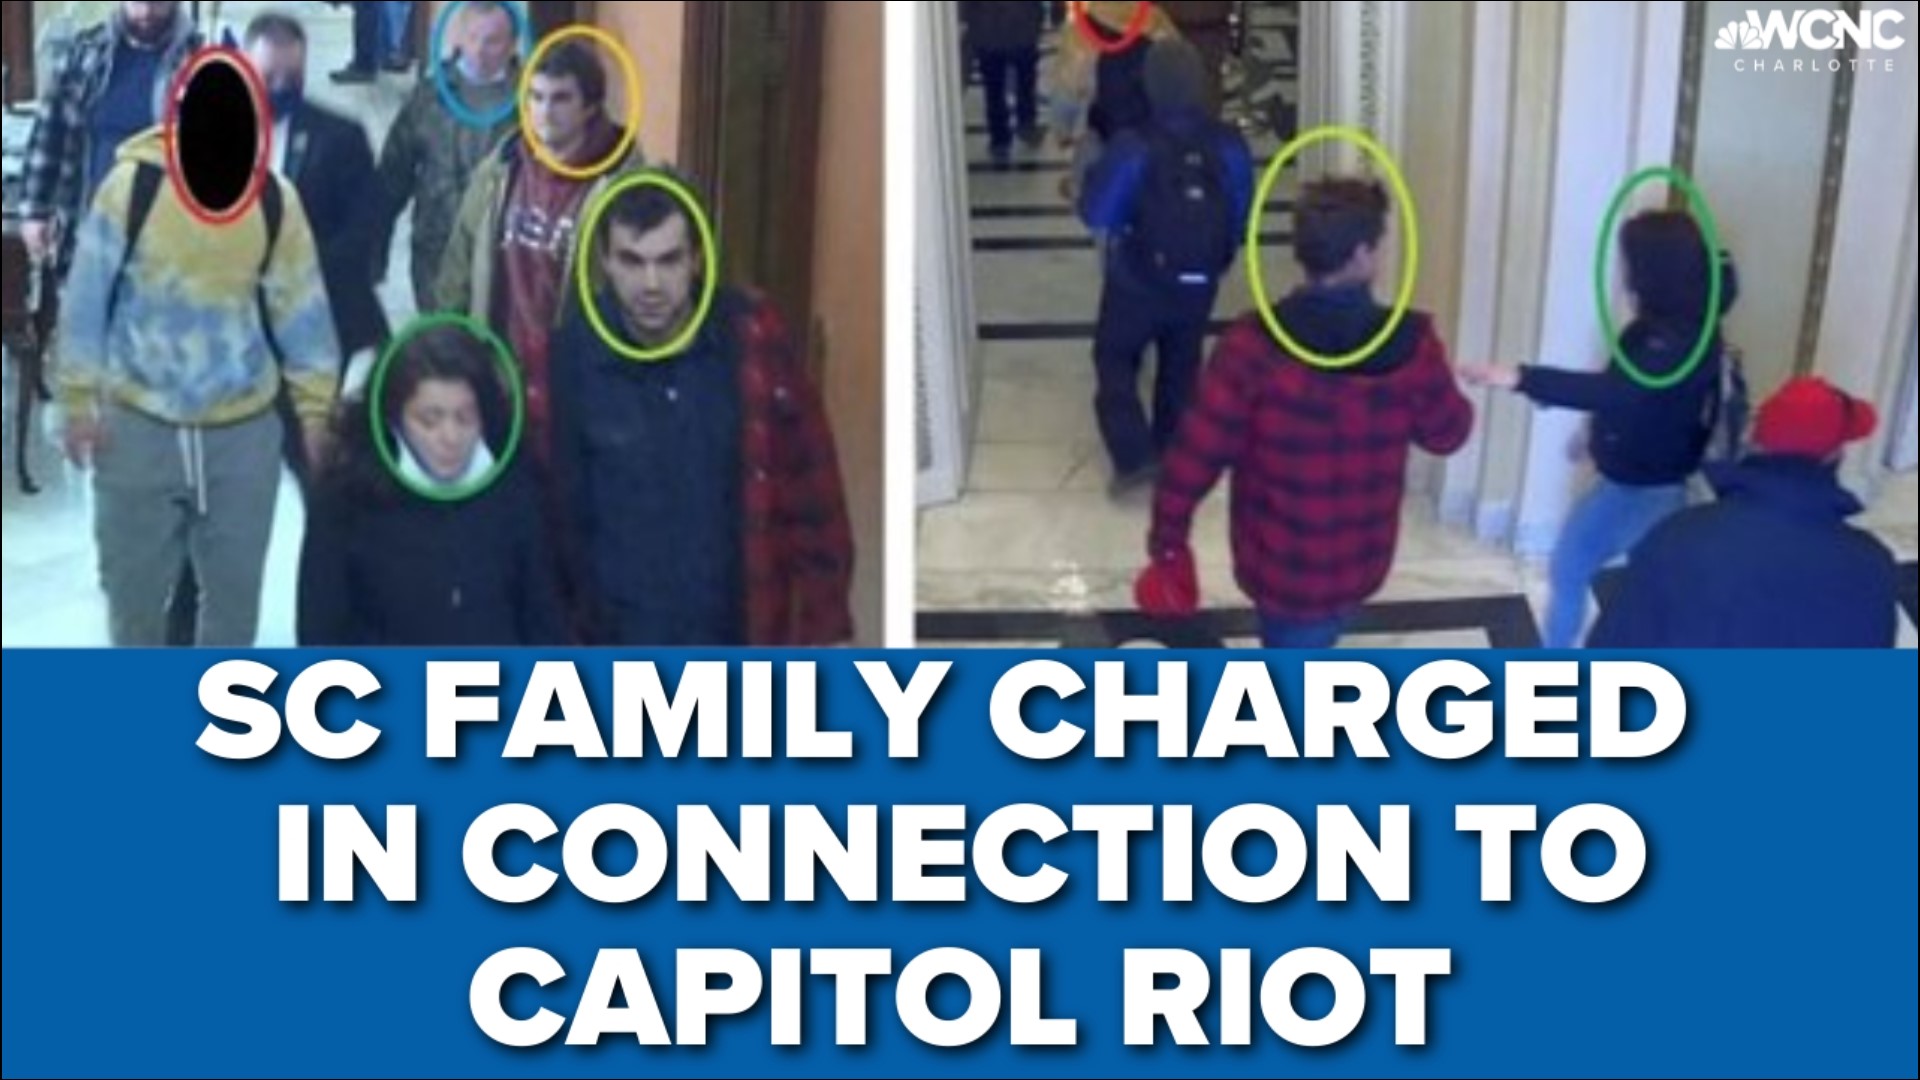 Four members of the Robinson family appeared in federal court on Thursday for their alleged involvement in the deadly attack on the capitol.